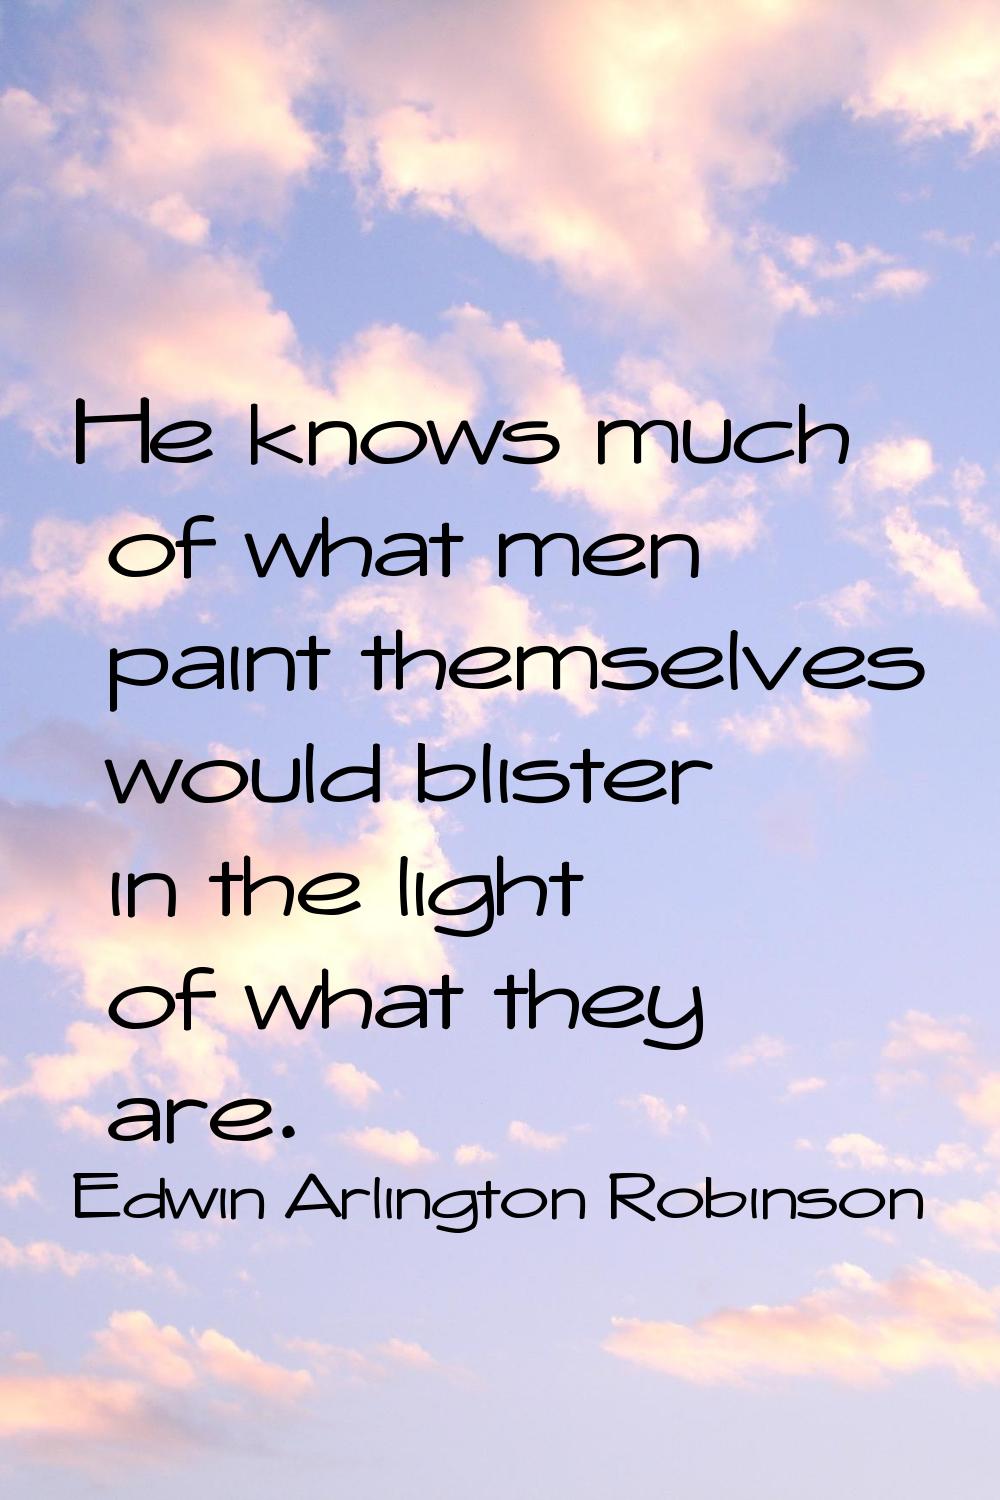 He knows much of what men paint themselves would blister in the light of what they are.